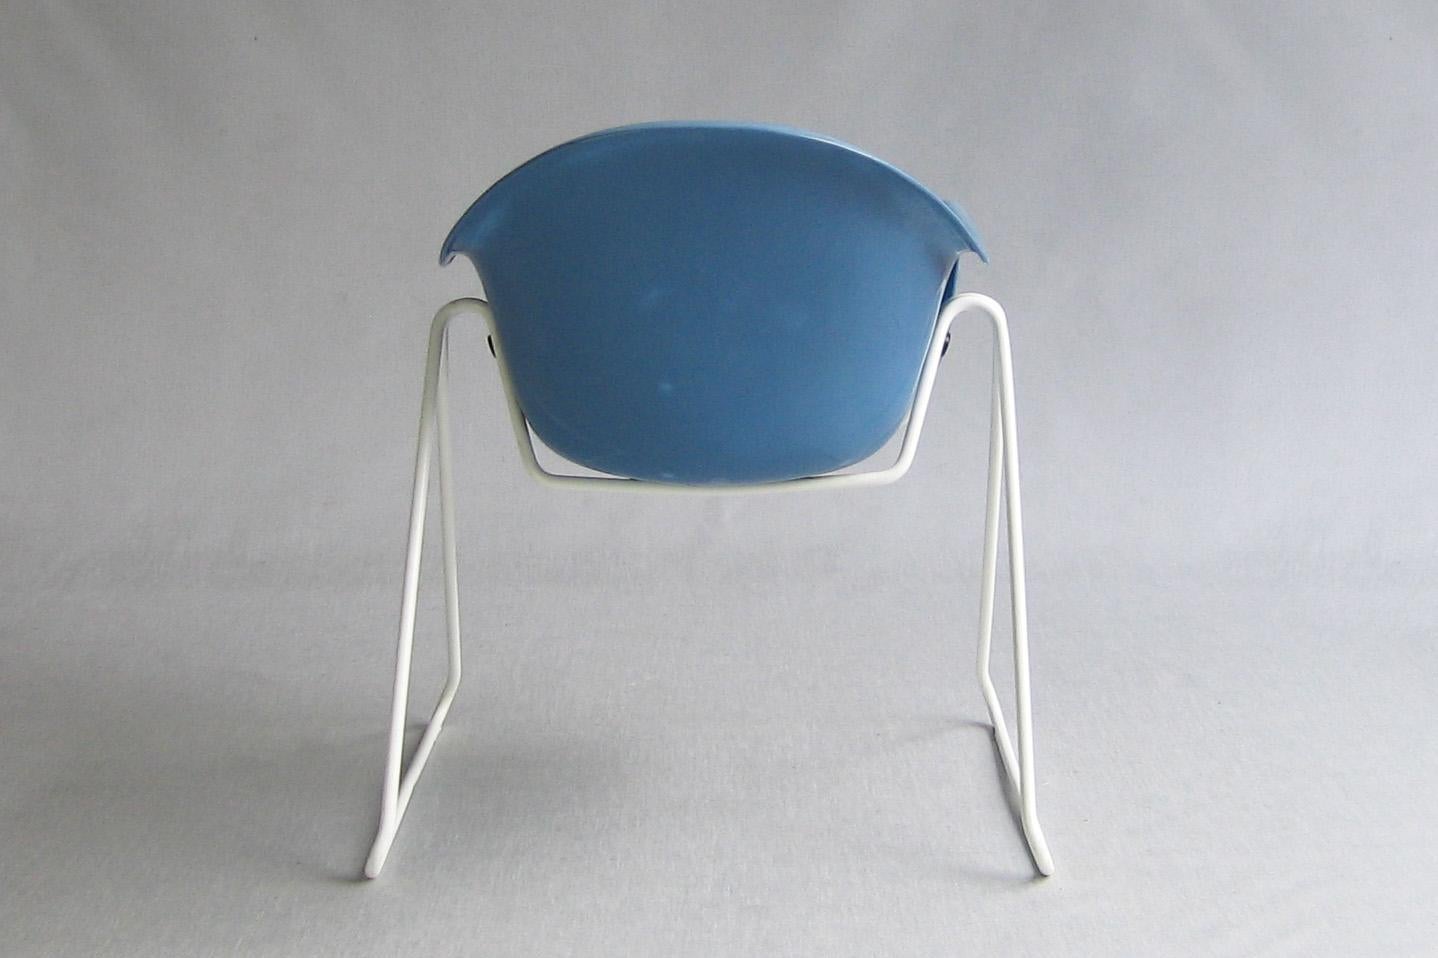 Pair of Walter Papst kids chairs, Wilkhahn, Germany 1961 - 1968 For Sale 8